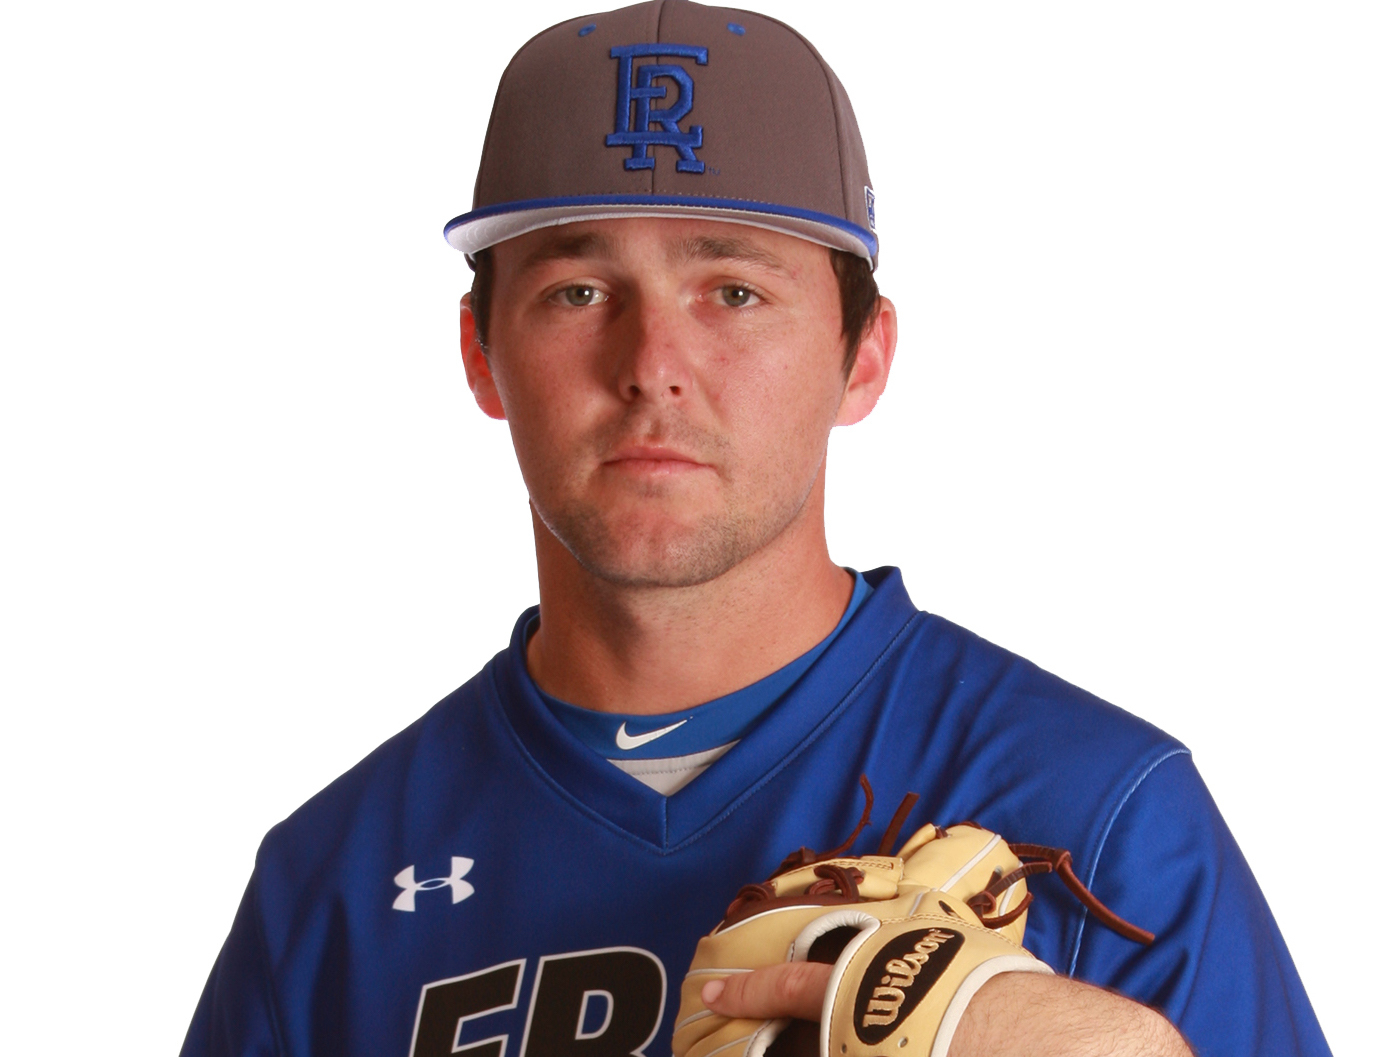 Kyle Marsh played at Embry-Riddle in 2018 to 2019. Courtesy photo